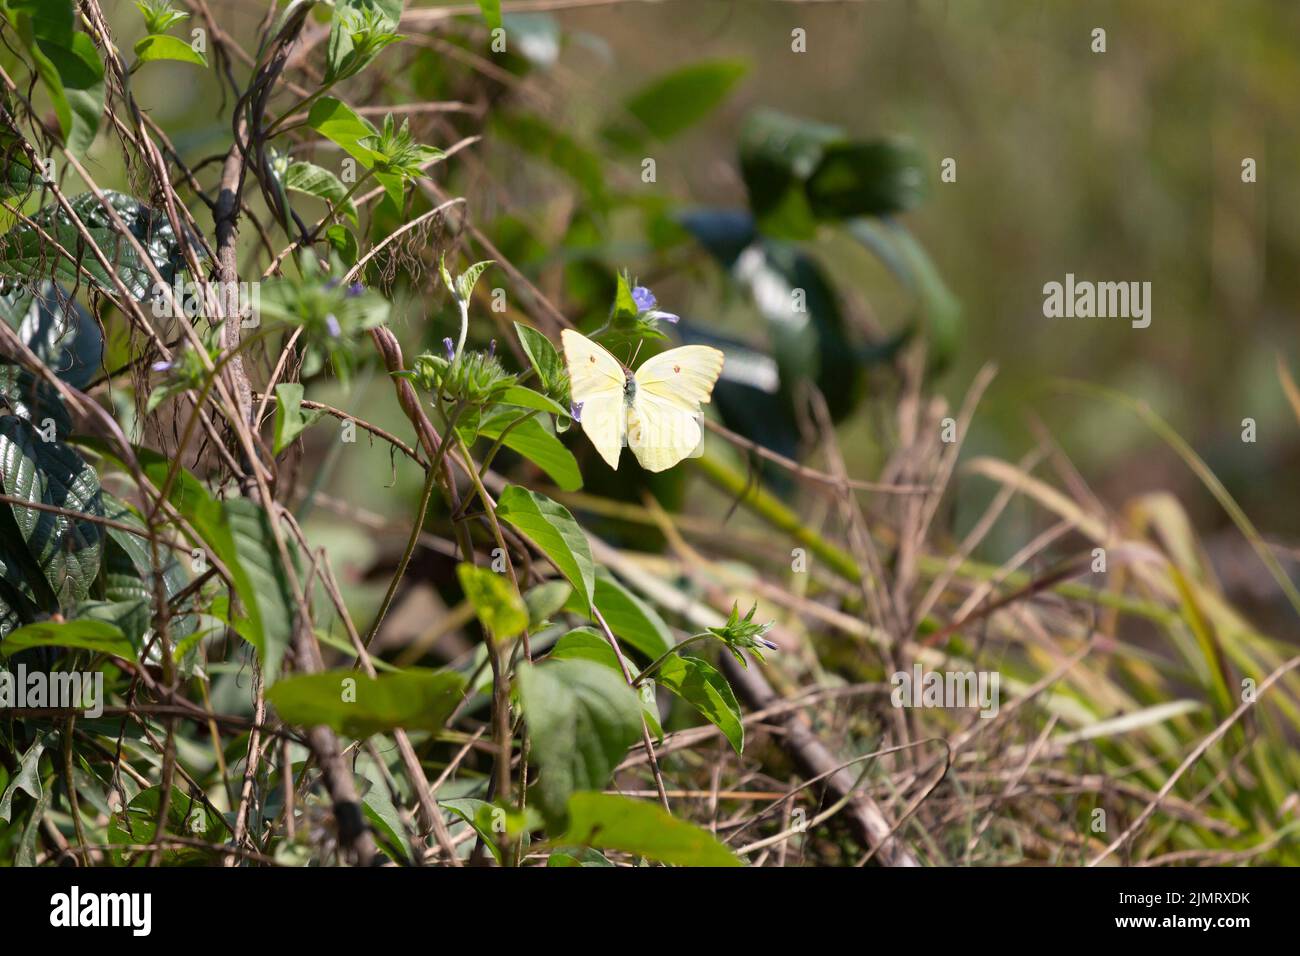 Cloudless sulphur butterfly (Phoebis sennae) pollinating a plant with violet blooming flowers Stock Photo